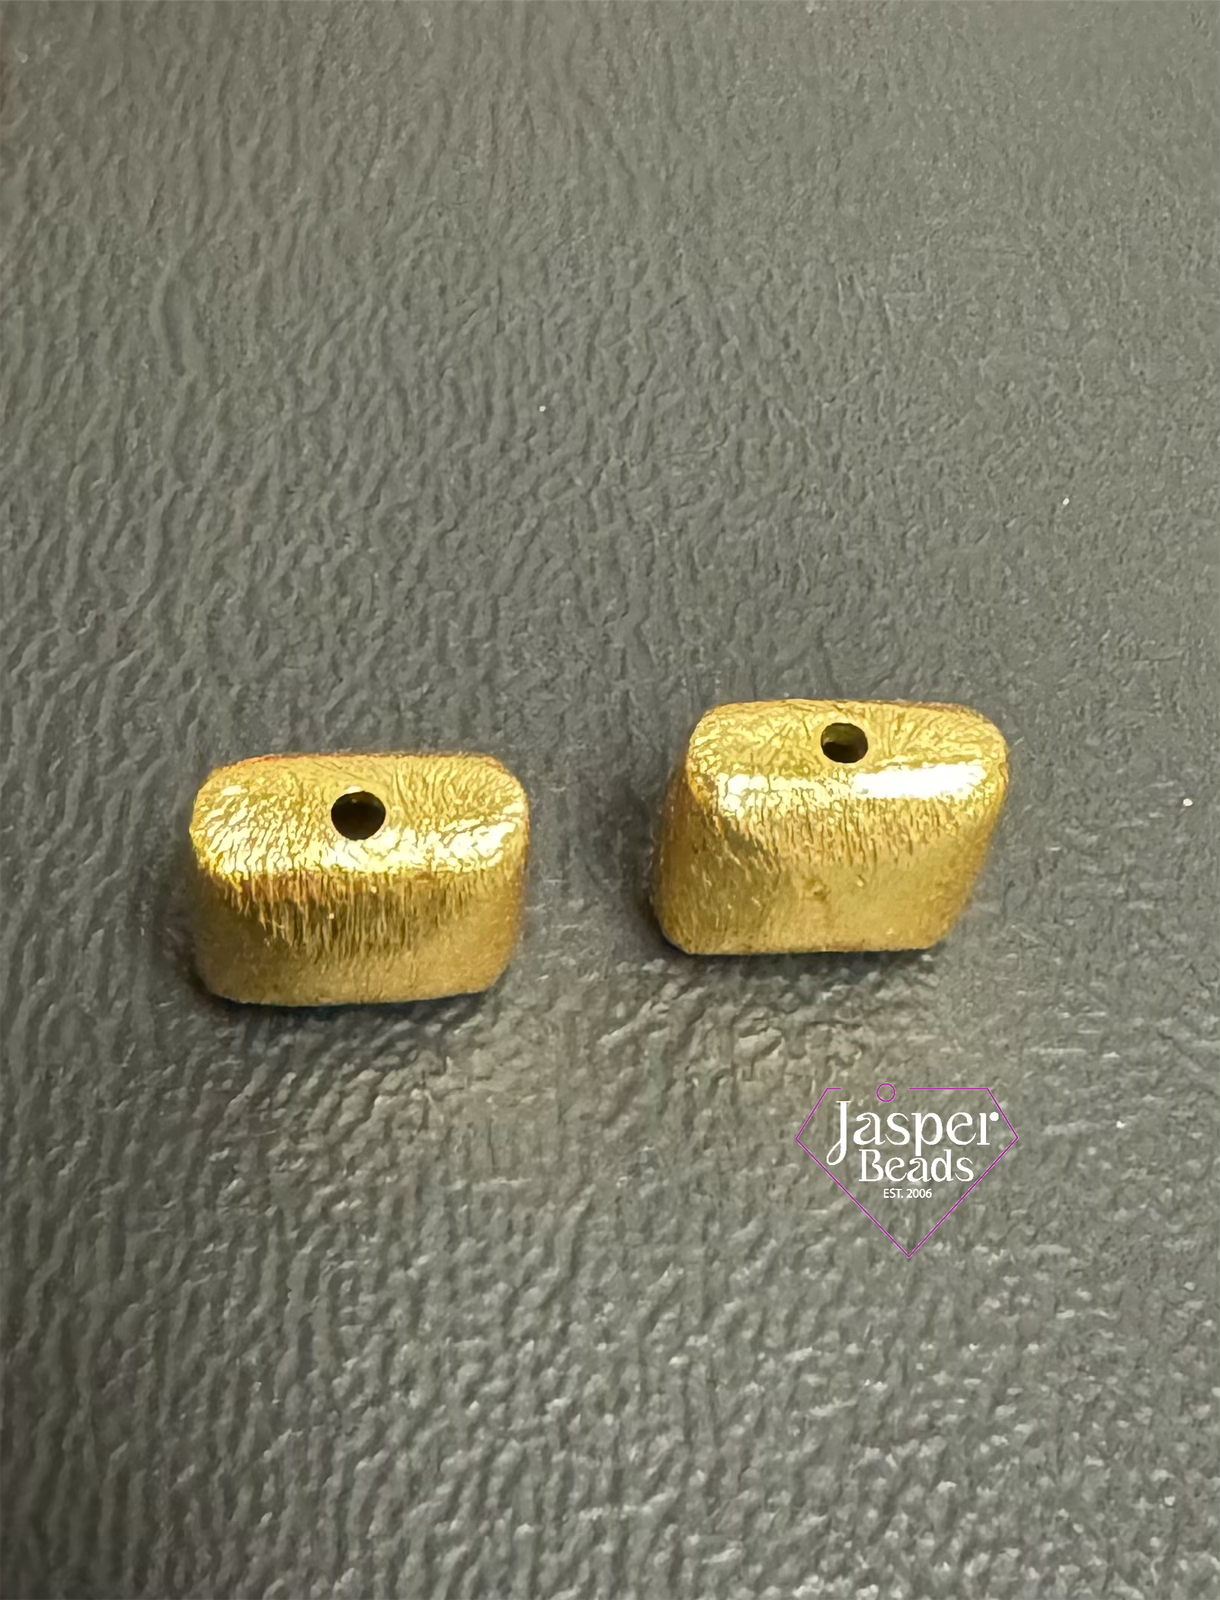 Square Bead Spacer